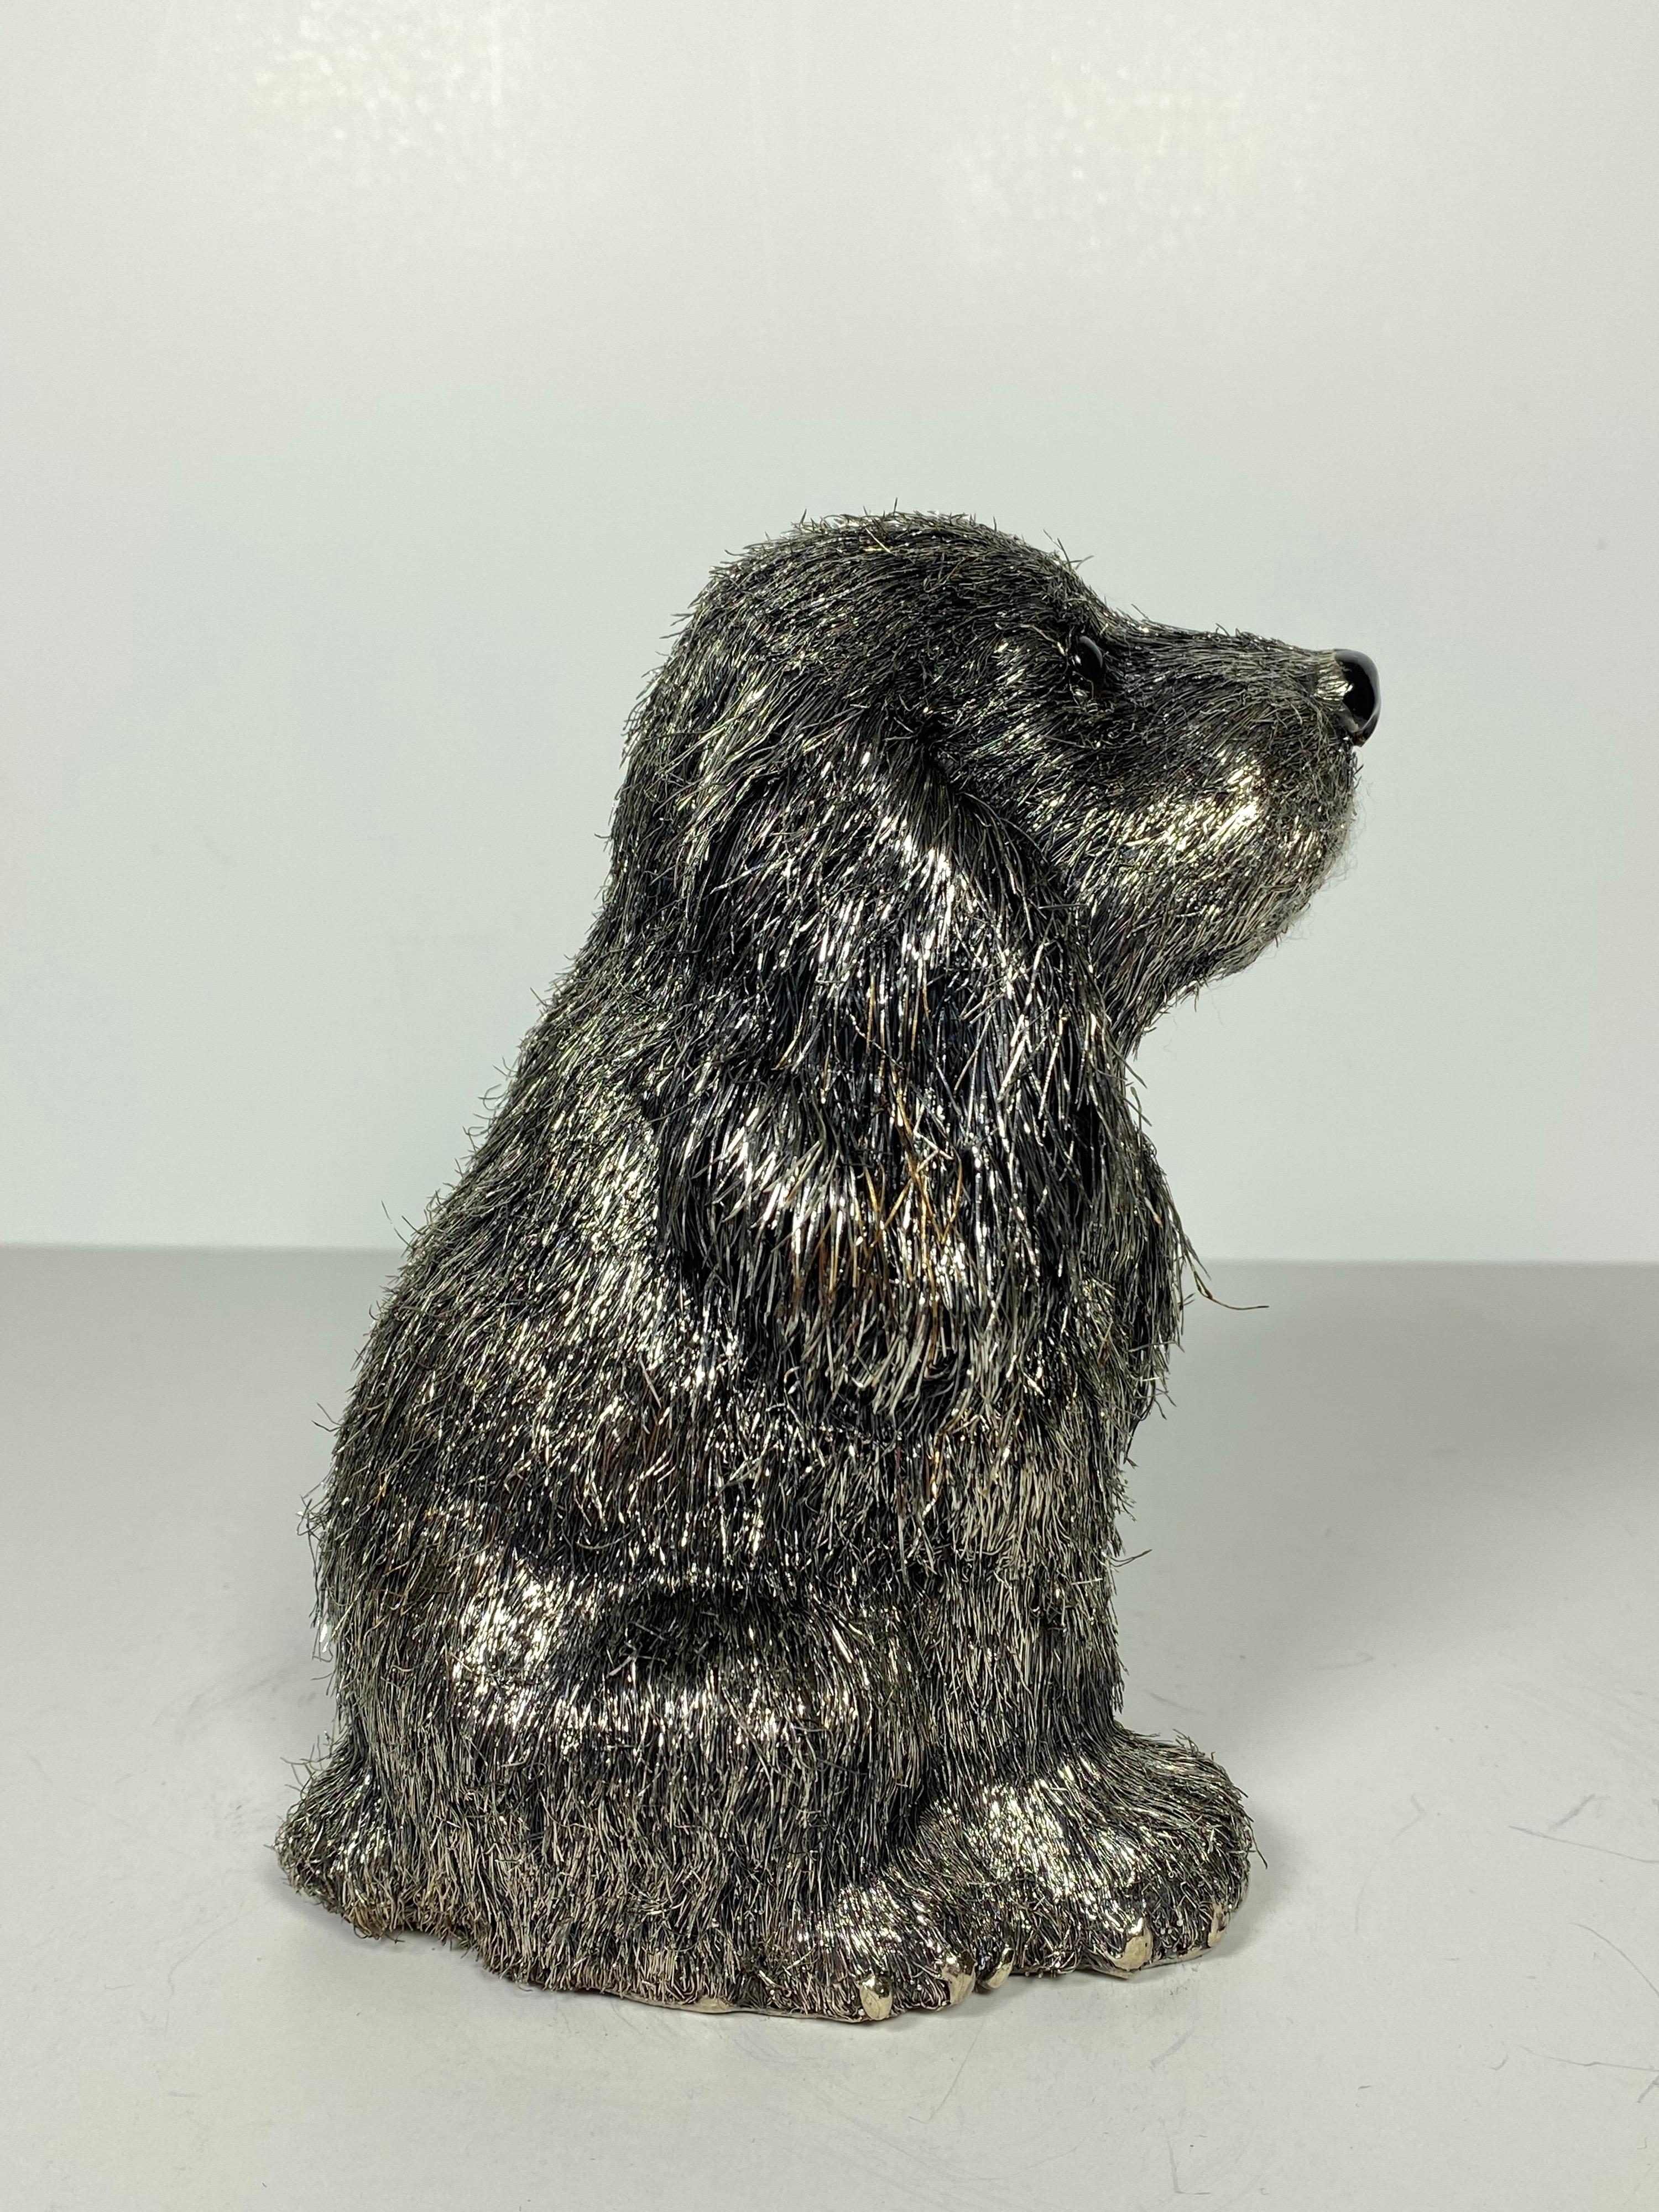 A Mario Buccellati Furry Animals Charming Dog, circa 1960

Standing 6” tall, this charming subject catches many eyes. Signed underneath M. Buccellati .925 Italy 

Buccellati: The Buccellati family has been perfecting the art of goldsmithing